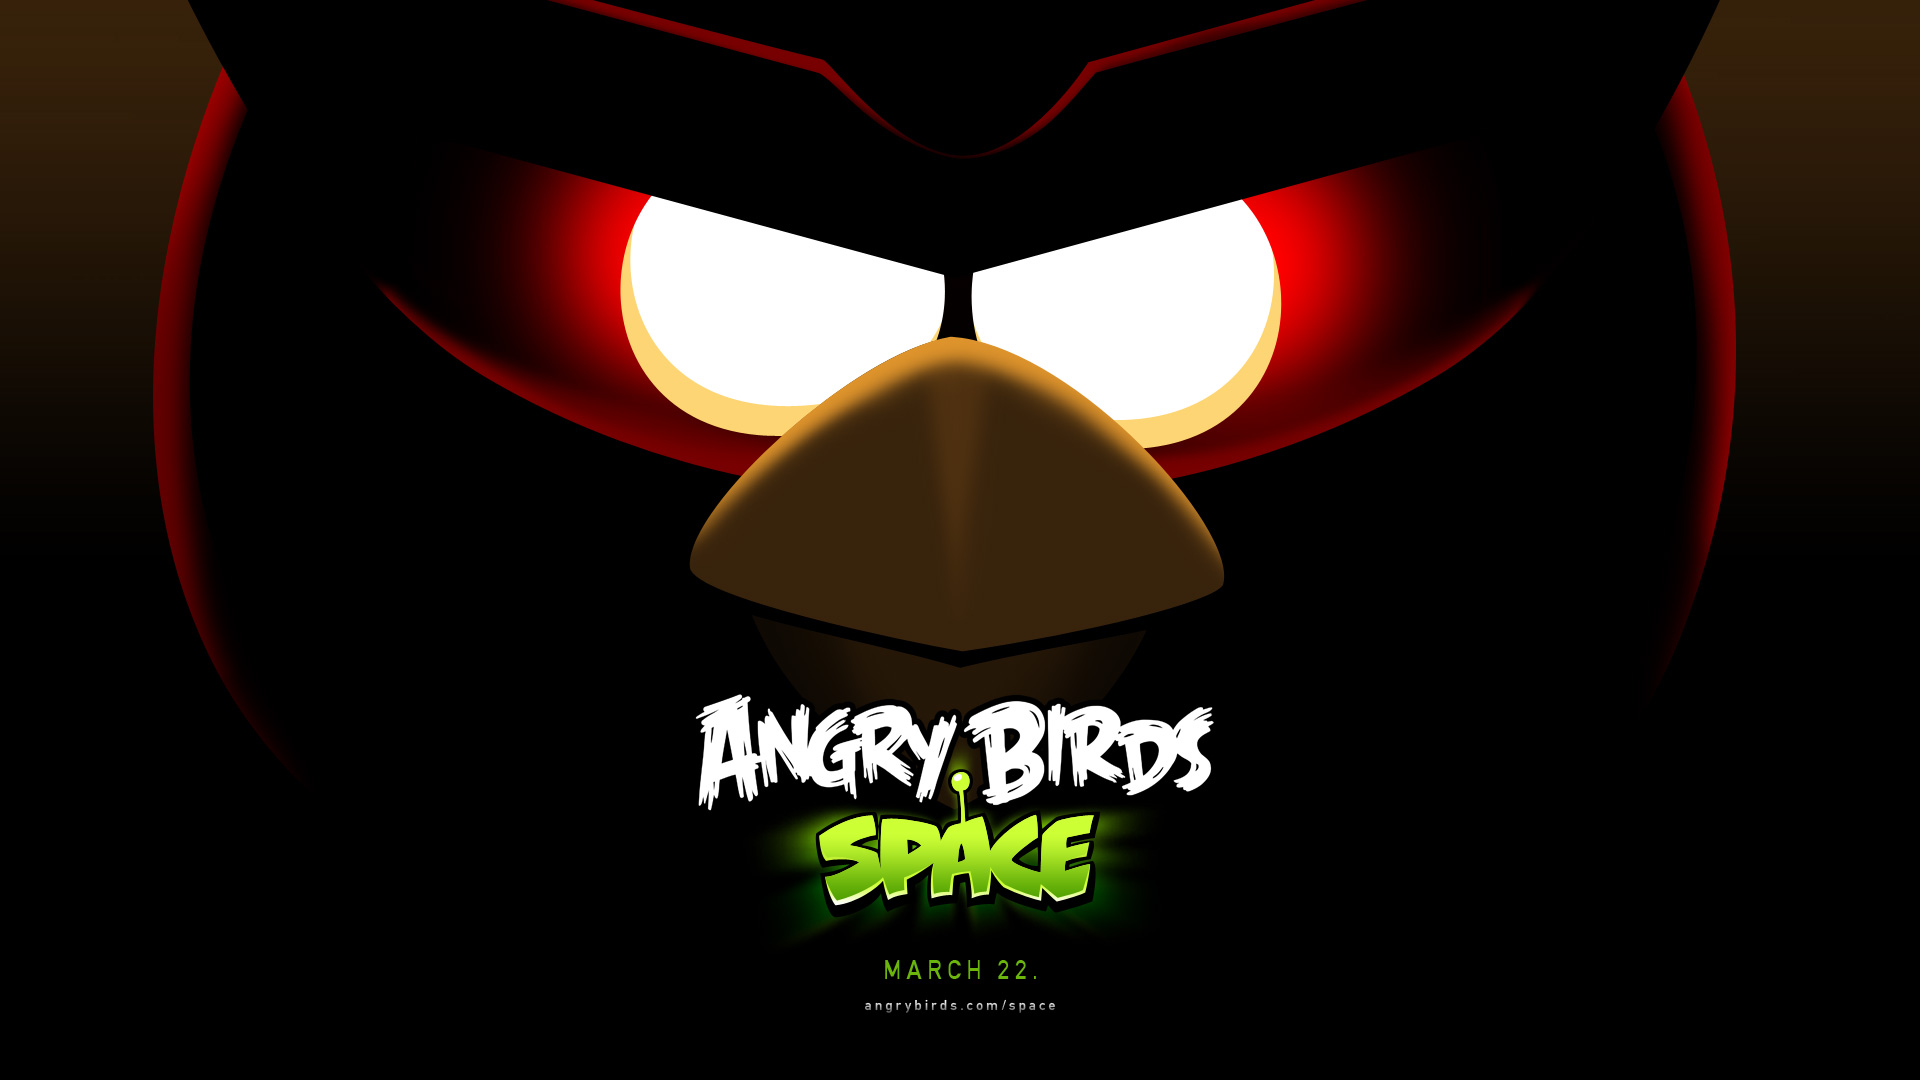 Get Angry Birds on Your Windows PC